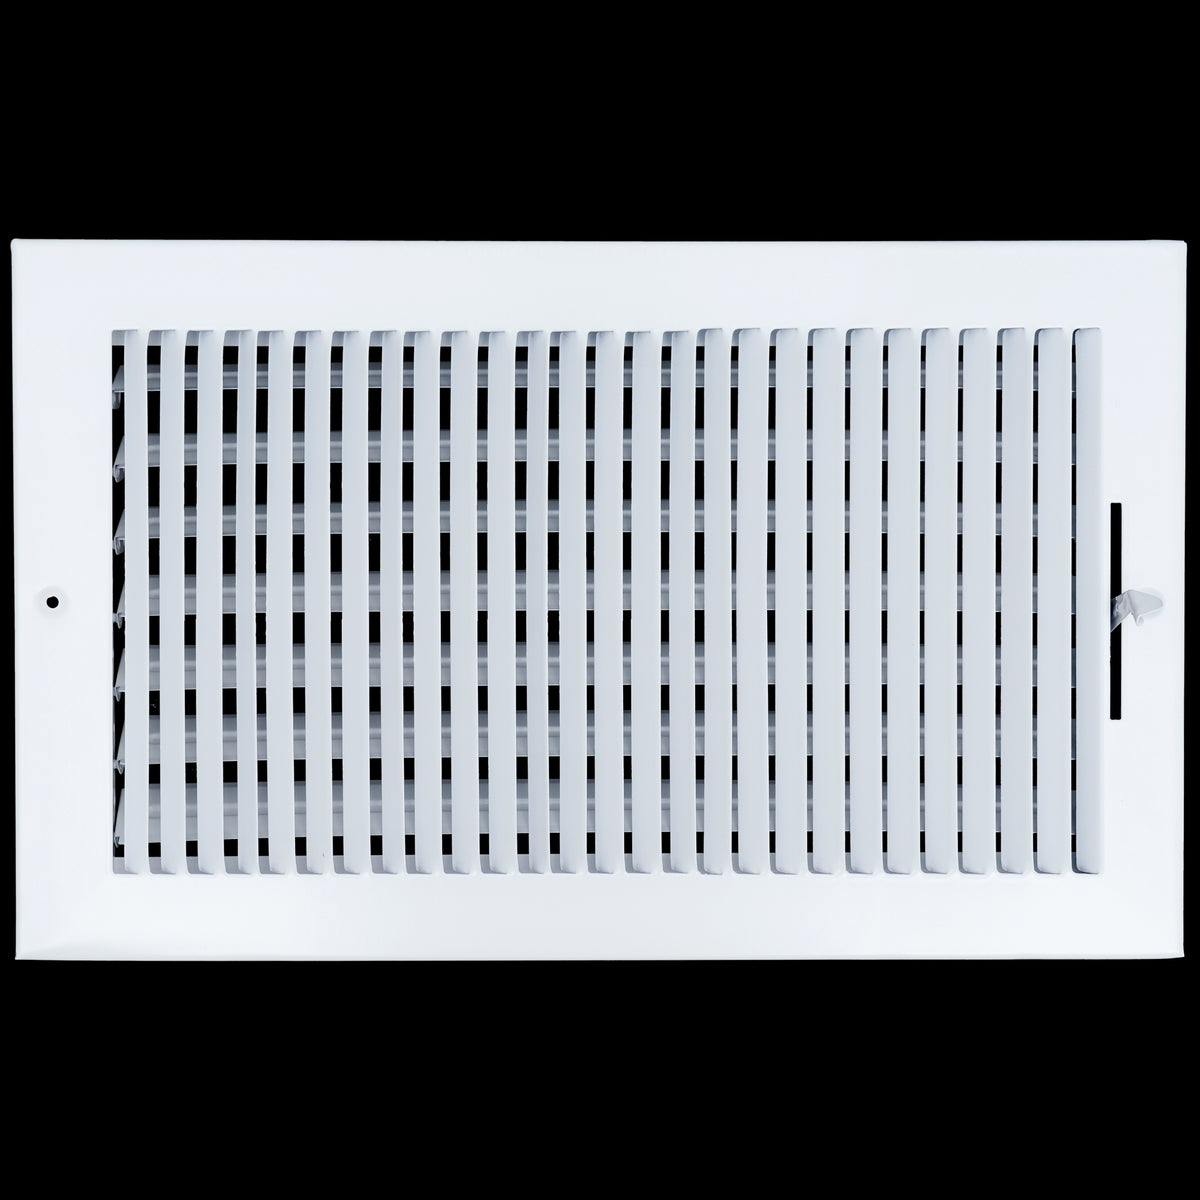 14 X 8 Duct Opening | 1 WAY Steel Air Supply Diffuser for Sidewall and Ceiling